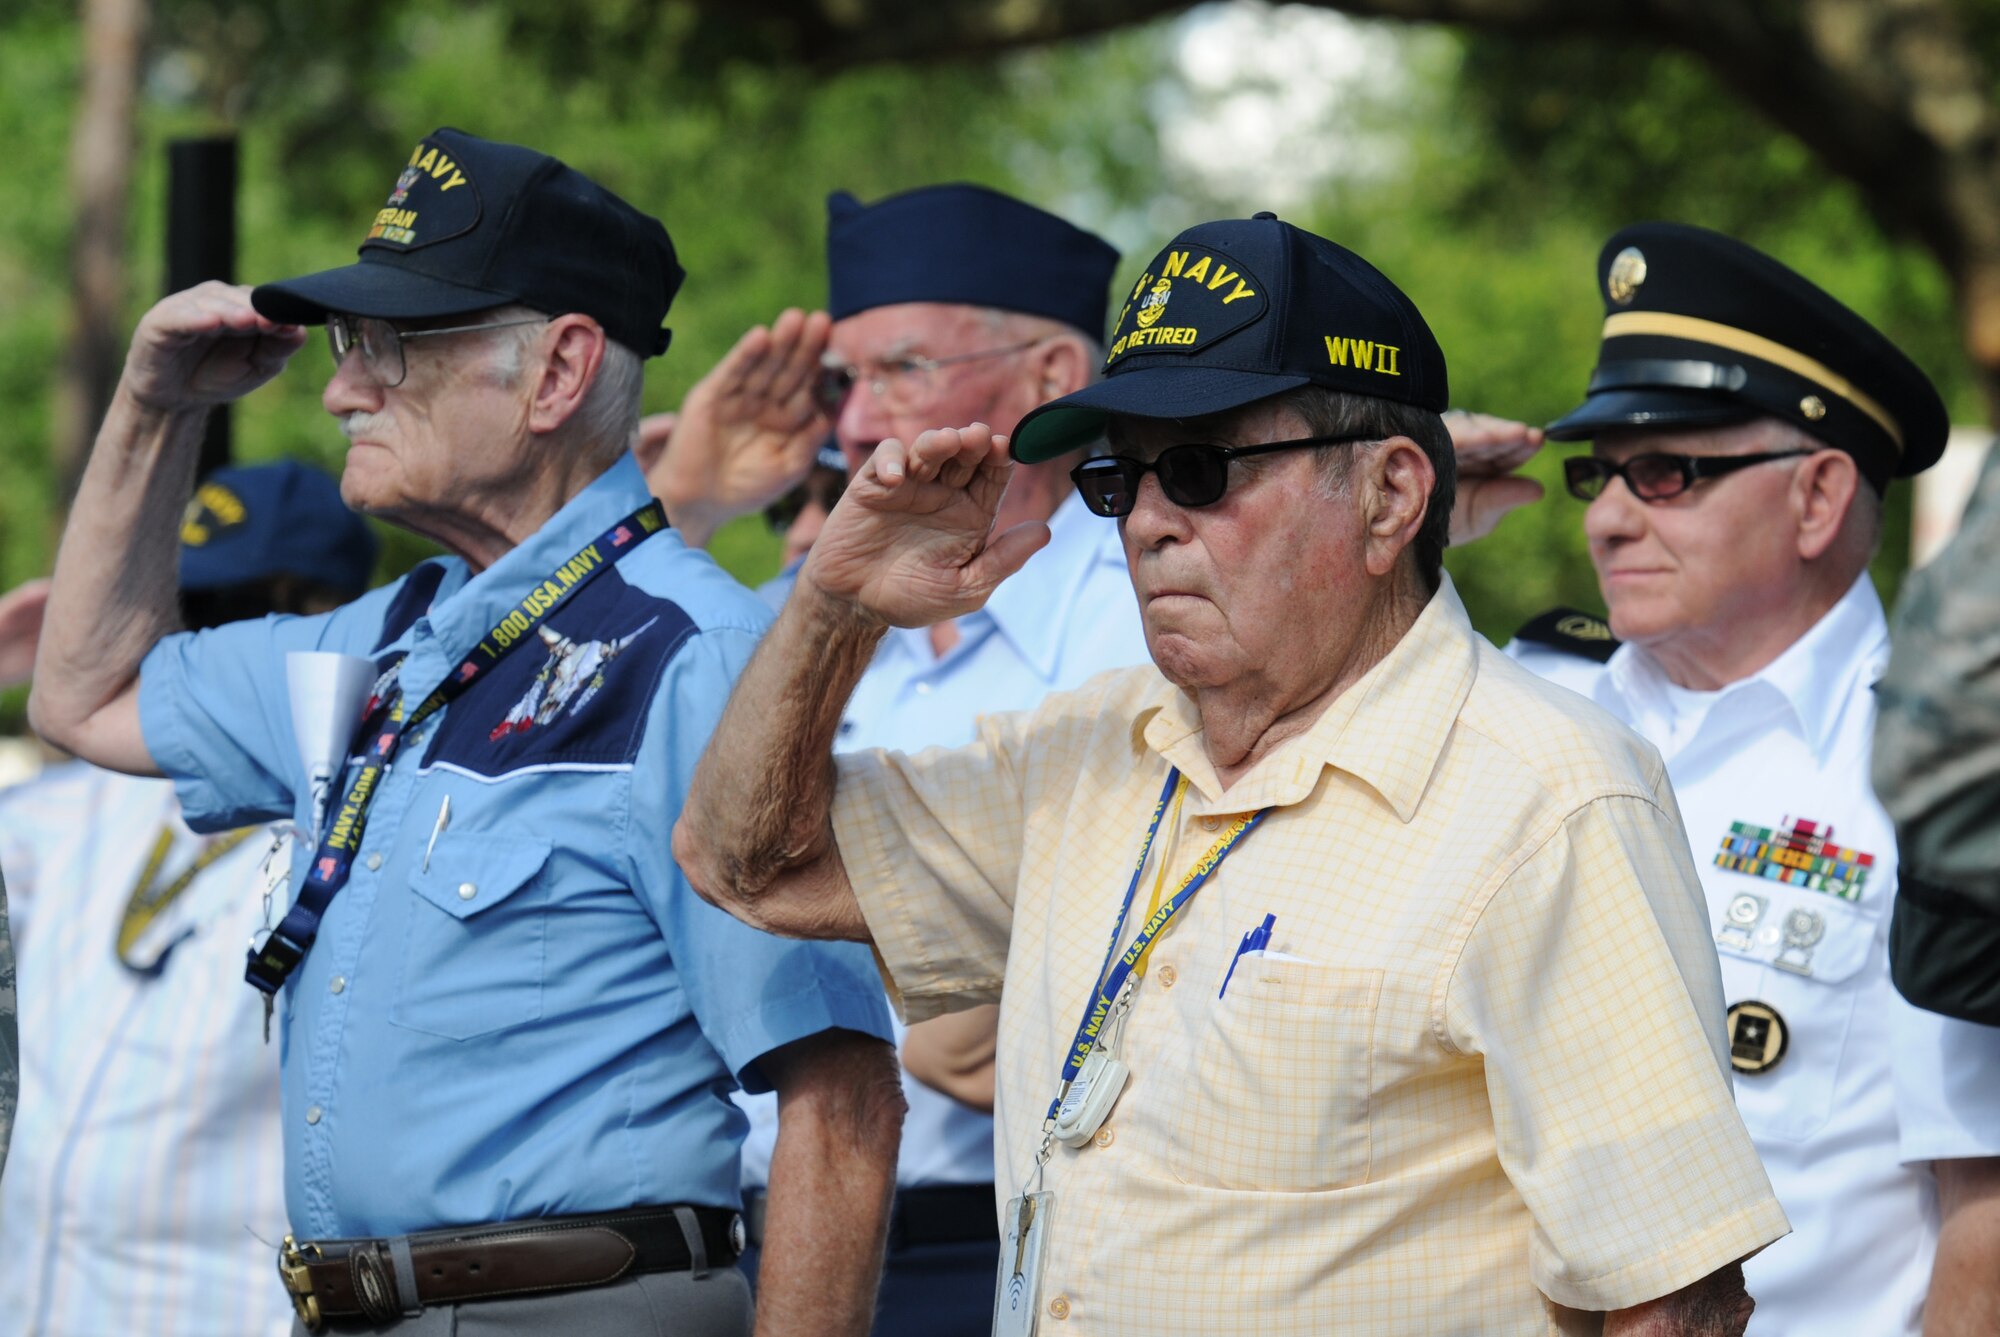 U.S. Navy retired Chief Petty Officer Frederick Petersen and fellow members from the Armed Forces Retirement Home render a salute during the playing of taps at the Lt. Samuel Reeves Keesler, Jr. Memorial Retreat Ceremony May 13, 2016, Keesler Air Force Base, Miss. The event was held in honor of Lt. Keesler’s date of entry into the Army Air Service 99 years ago. The retreat ceremony is part of a year-long celebration of Lt. Keesler, a Mississippi native and WORLD WAR I hero, and the 75th anniversary of the opening of the base. (U.S. Air Force photo by Kemberly Groue)